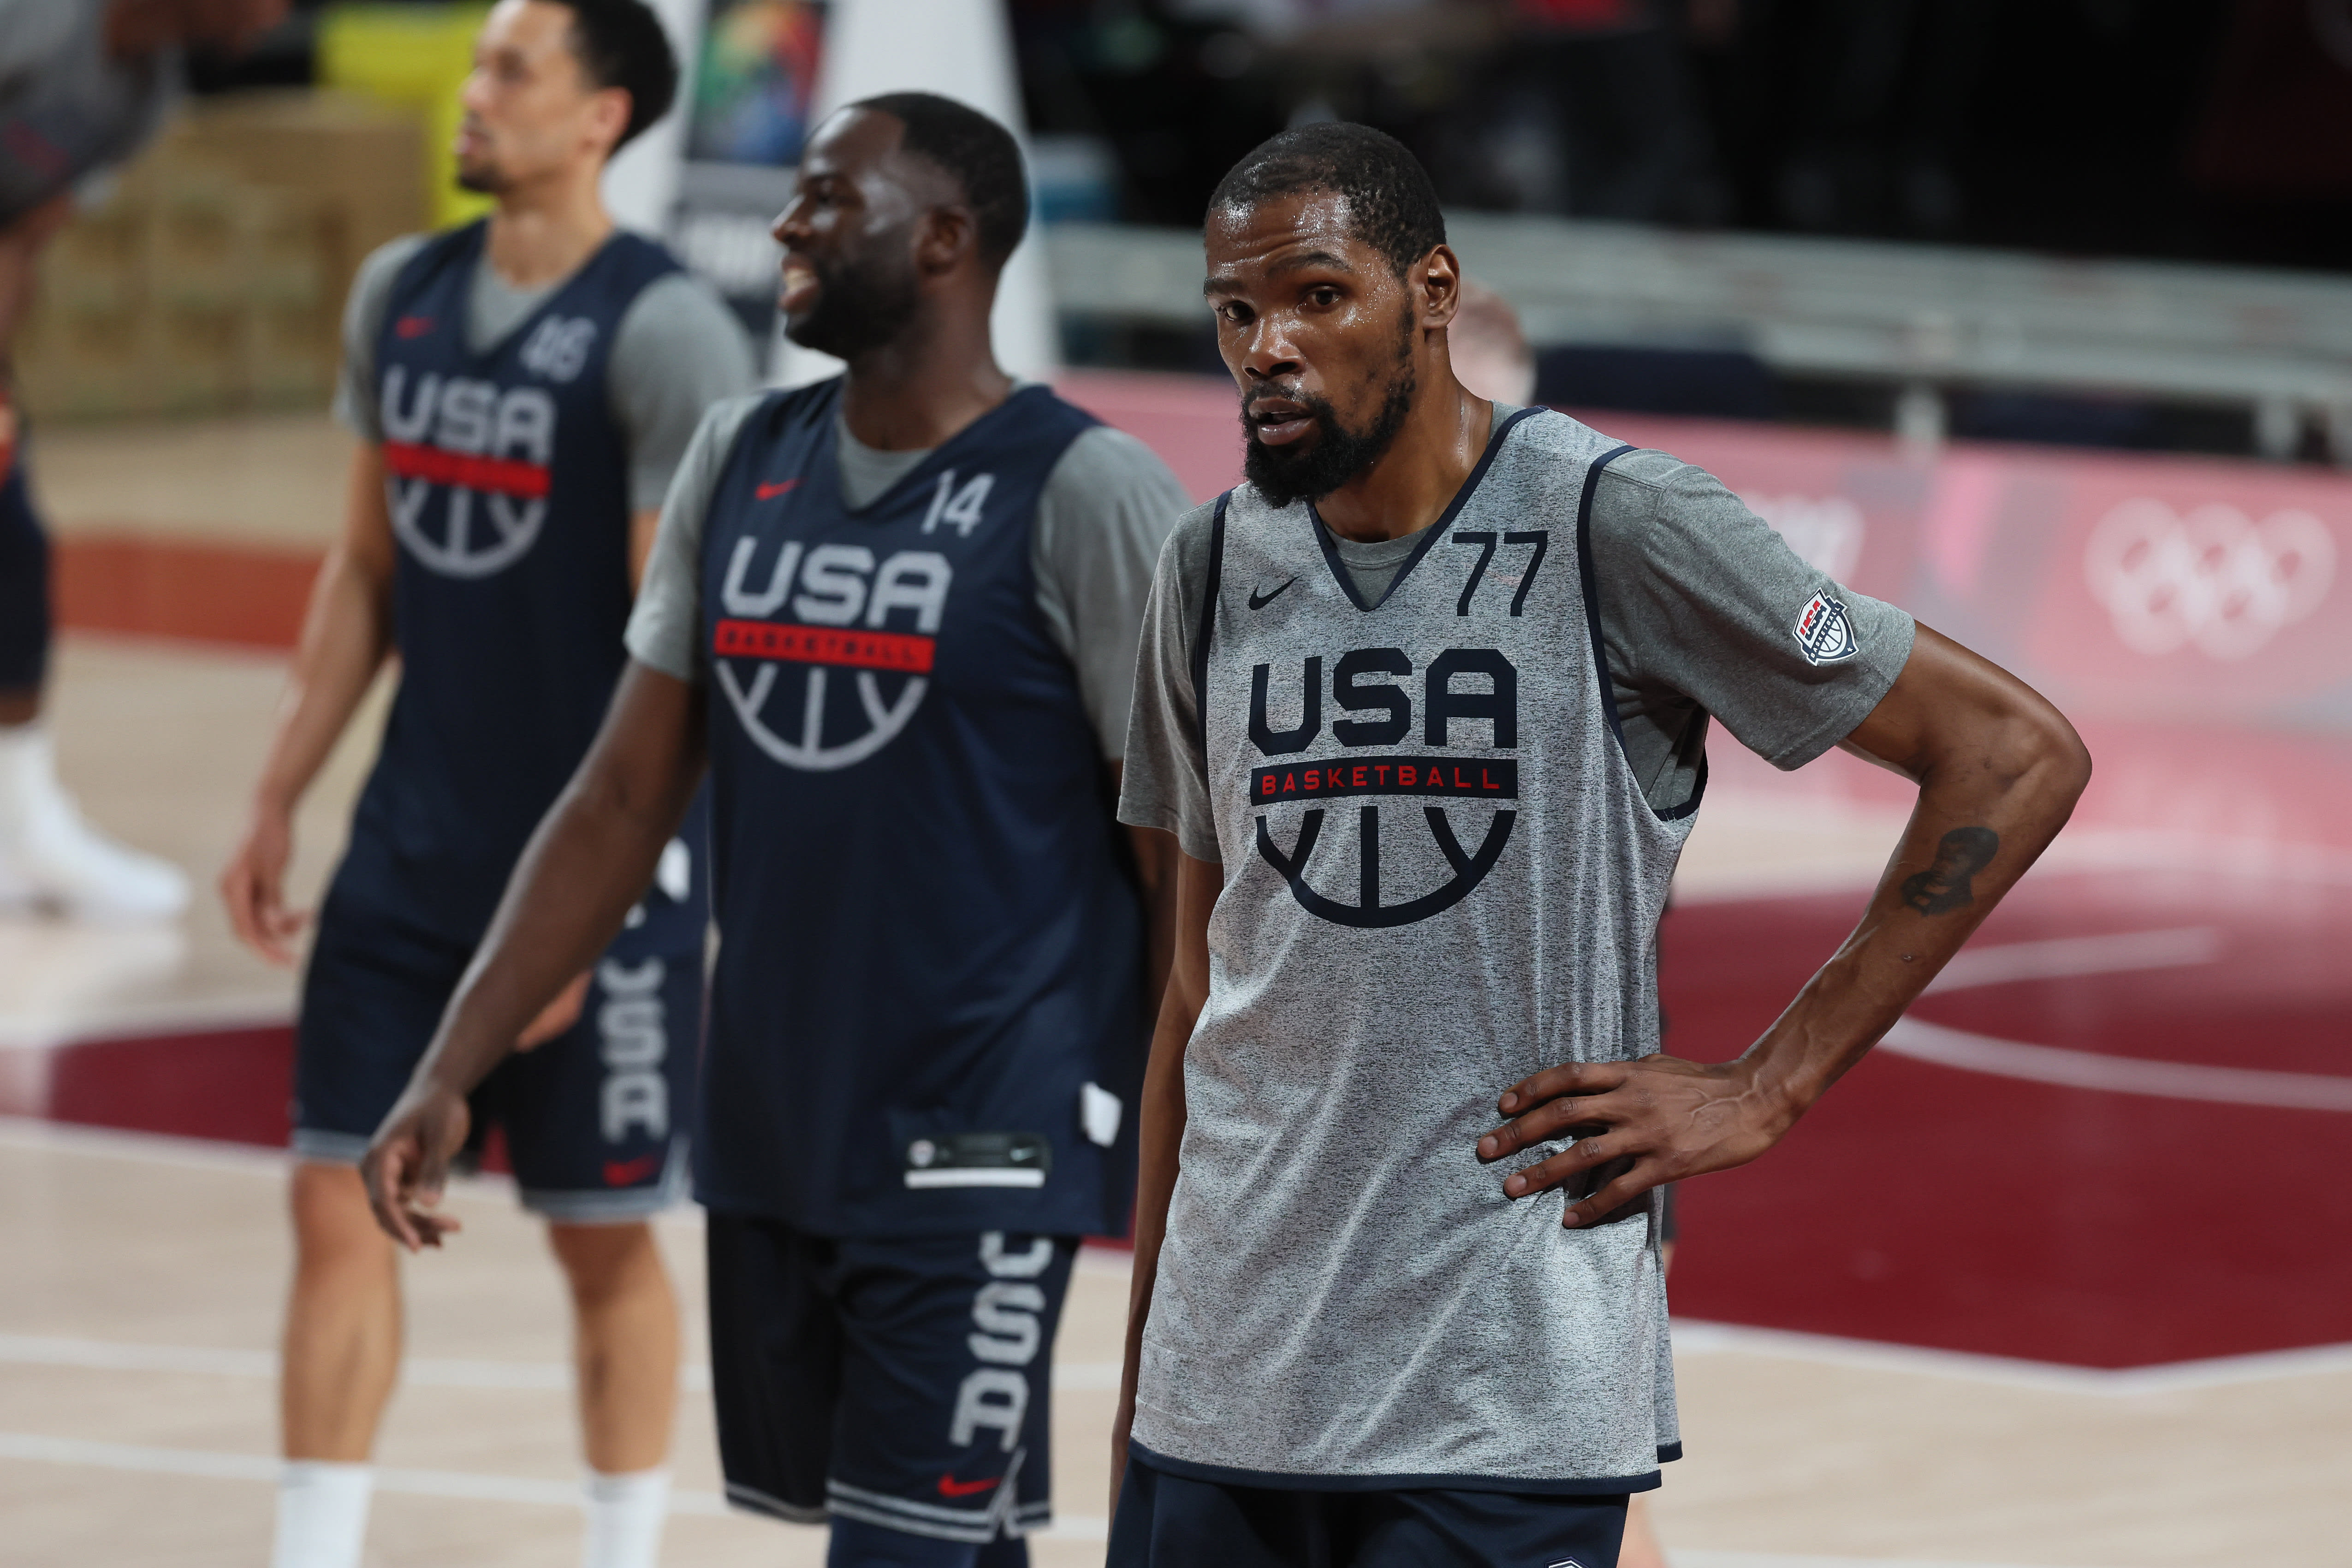 Kevin Durant, Biography, Stats, Olympics, & Facts